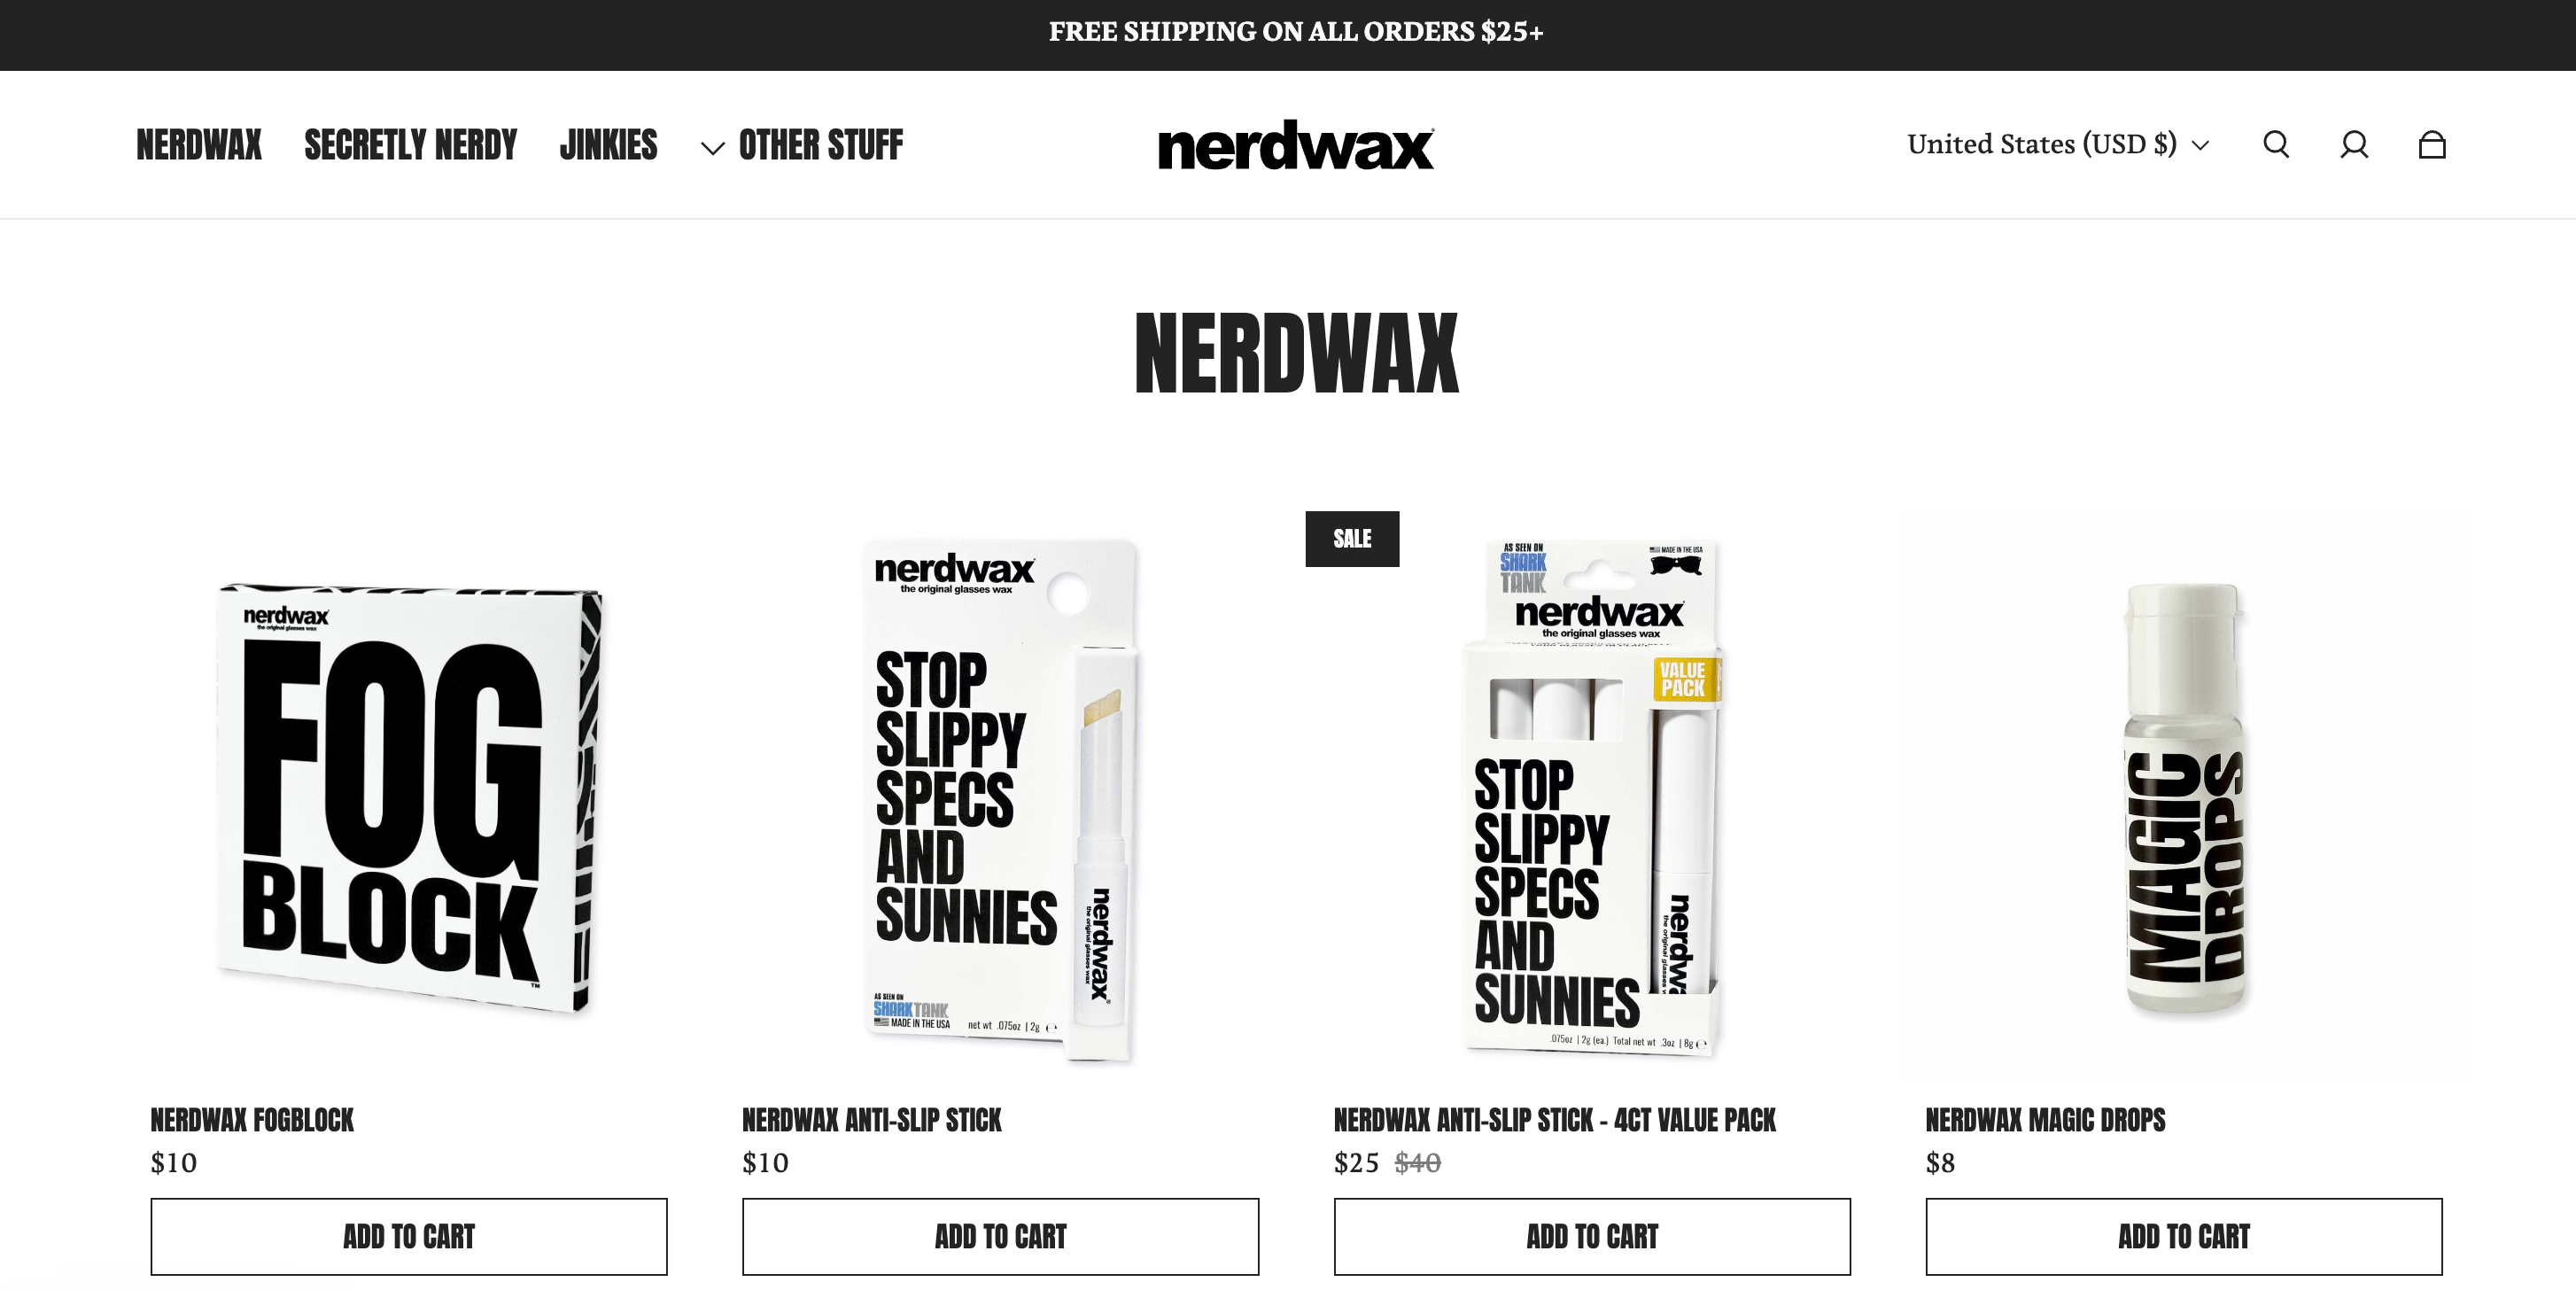 Ecommerce product collection for the brand Nerdwax